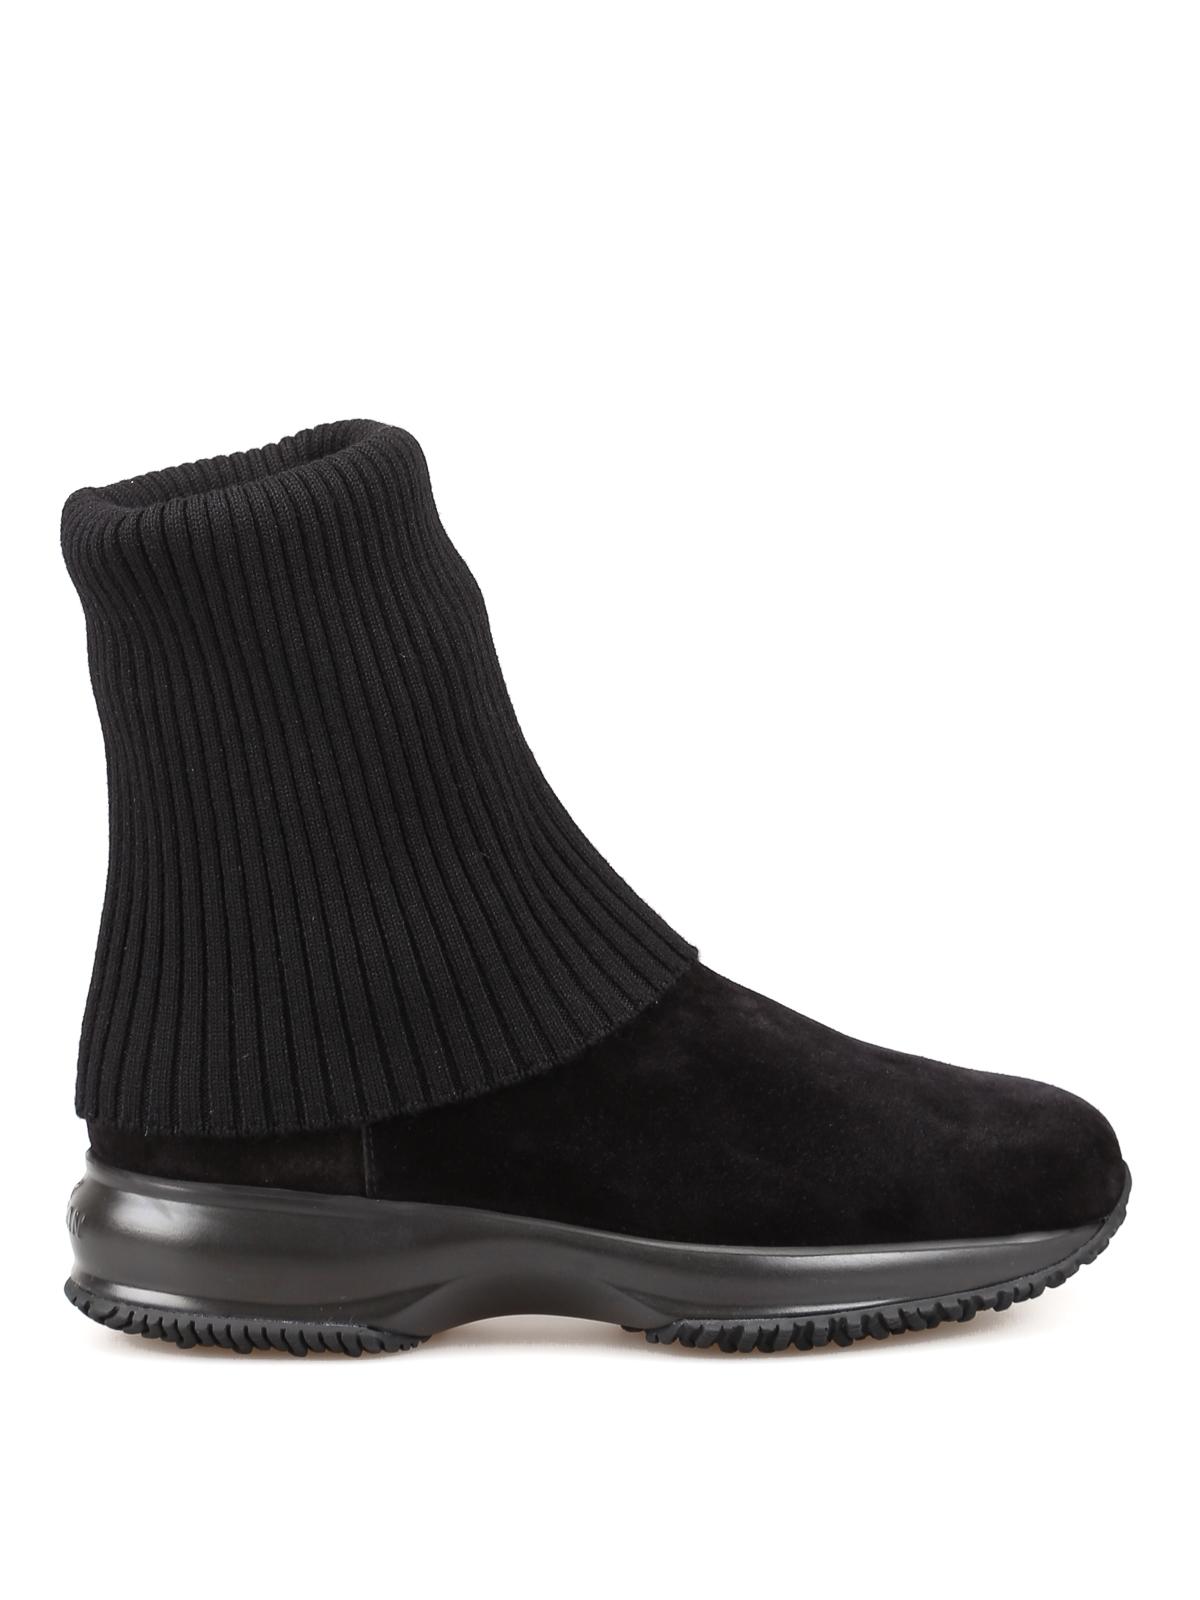 Hogan Interactive Suede And Wool Ankle Boots in Black - Lyst